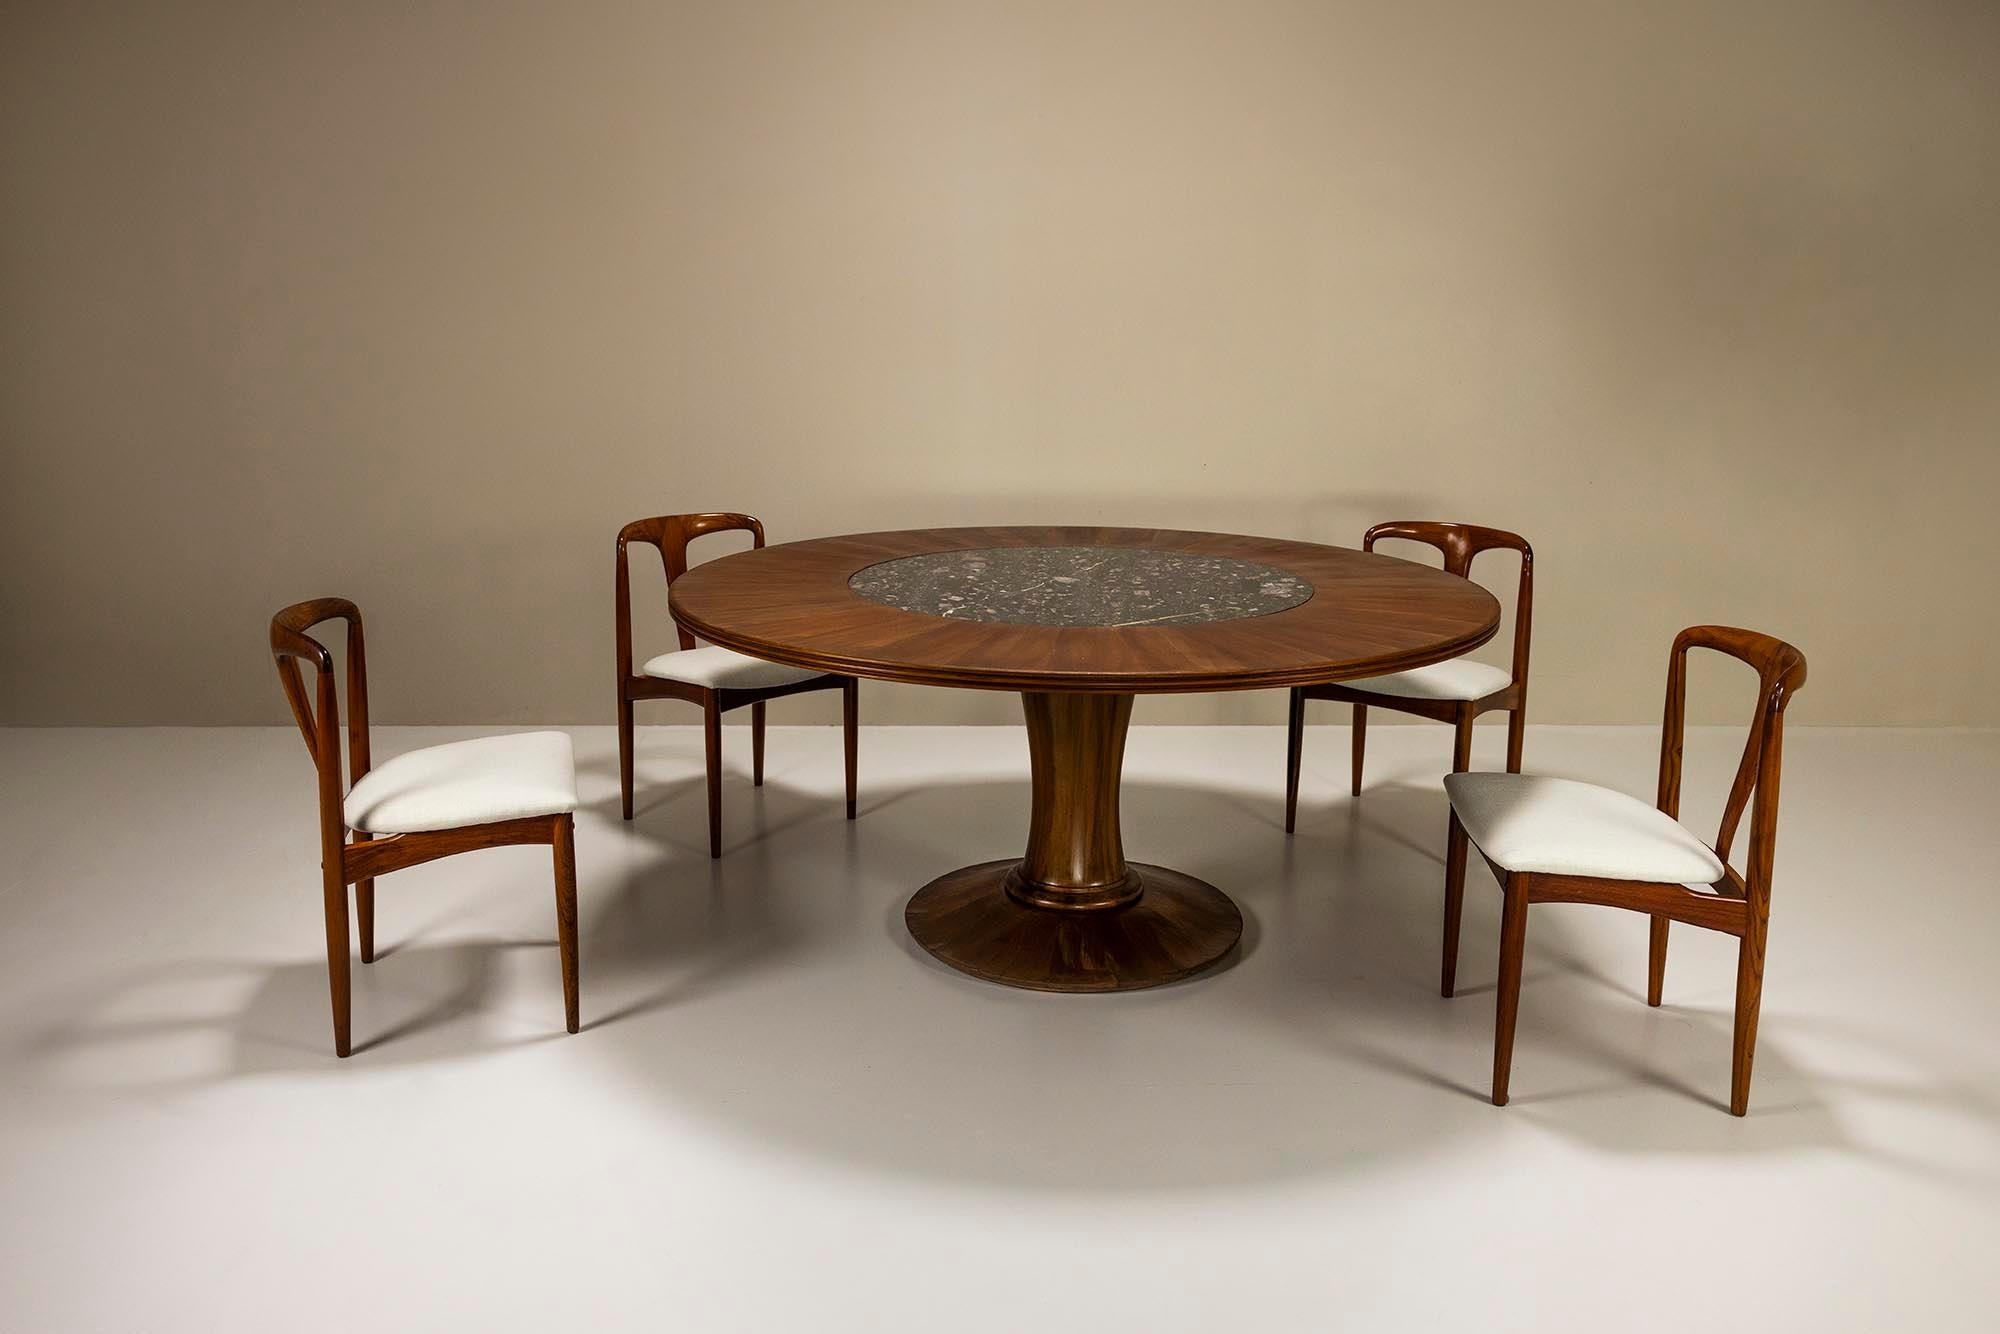 Mid-Century Modern Round Dining Table In Mahogany And Terrazzo, Italy 1950's For Sale